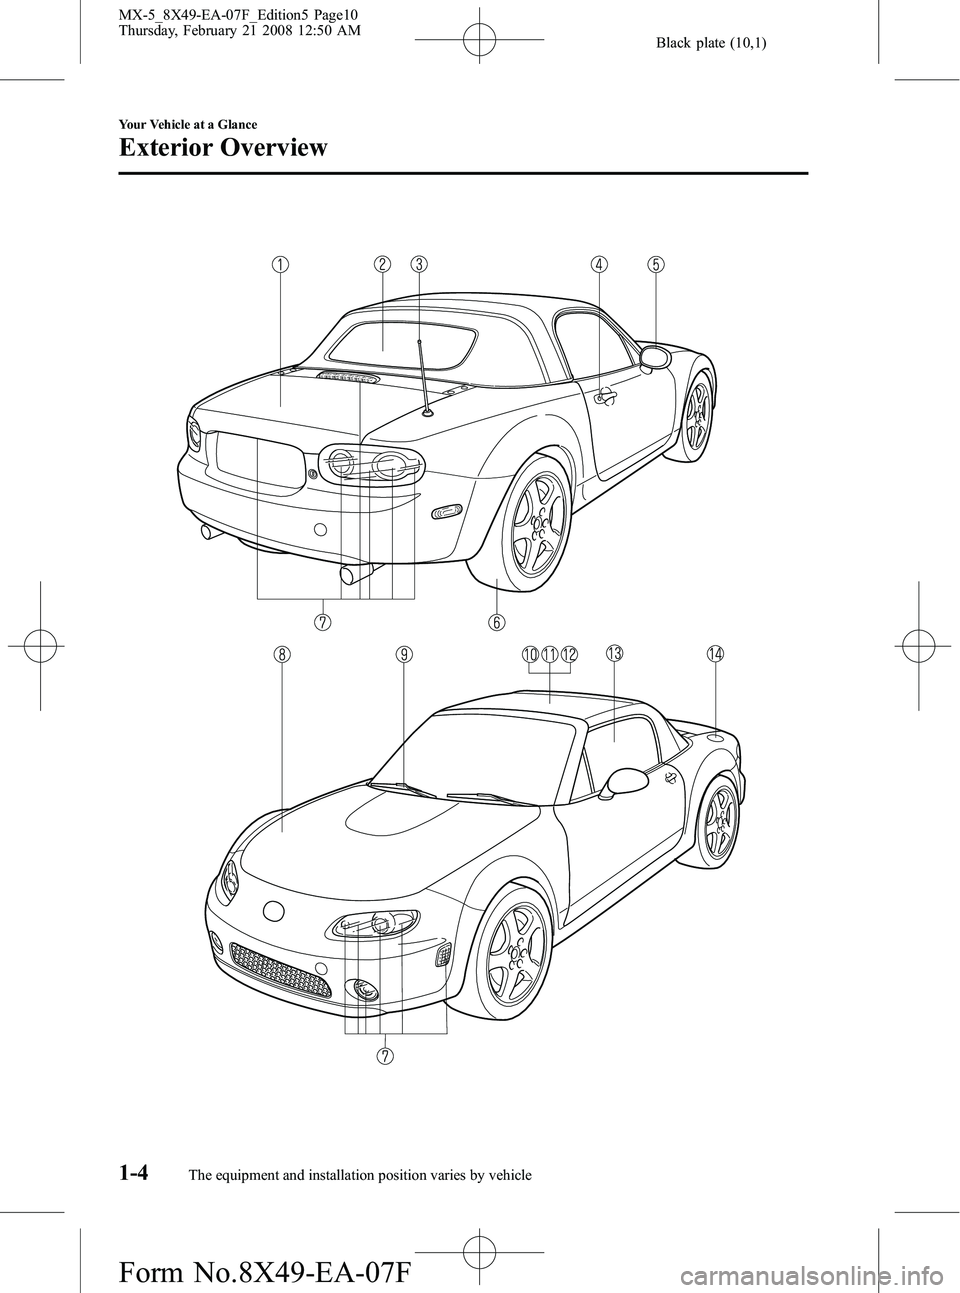 MAZDA MODEL MX-5 MIATA 2008  Owners Manual Black plate (10,1)
1-4
Your Vehicle at a Glance
The equipment and installation position varies by vehicle
Exterior Overview
MX-5_8X49-EA-07F_Edition5 Page10
Thursday, February 21 2008 12:50 AM
Form No